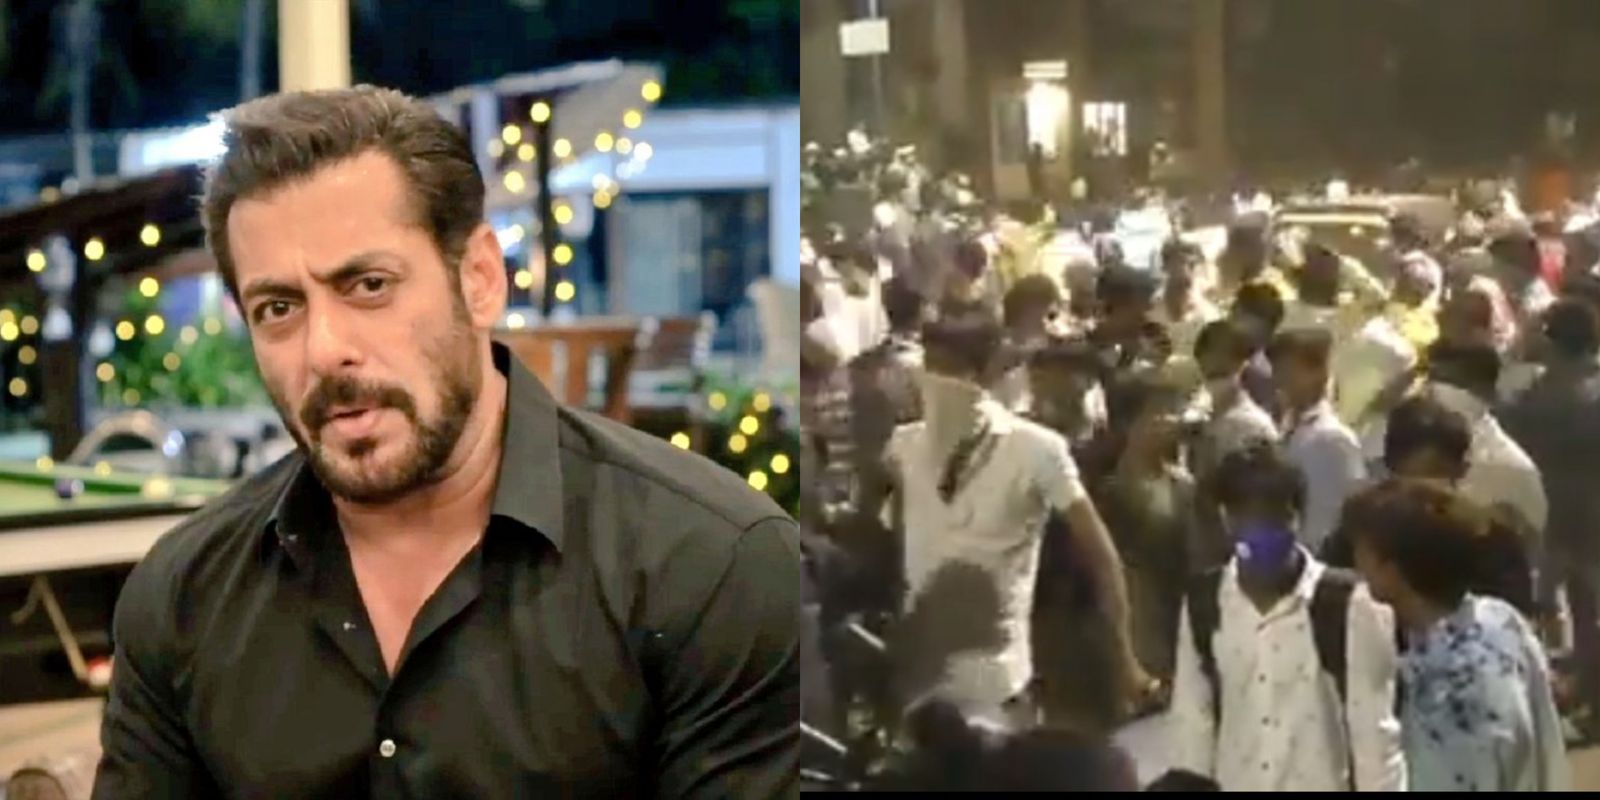 Salman Khan’s Fans Gather In Bhiwandi Amid Lockdown After Hearing Rumors About Him Distributing Money And Food